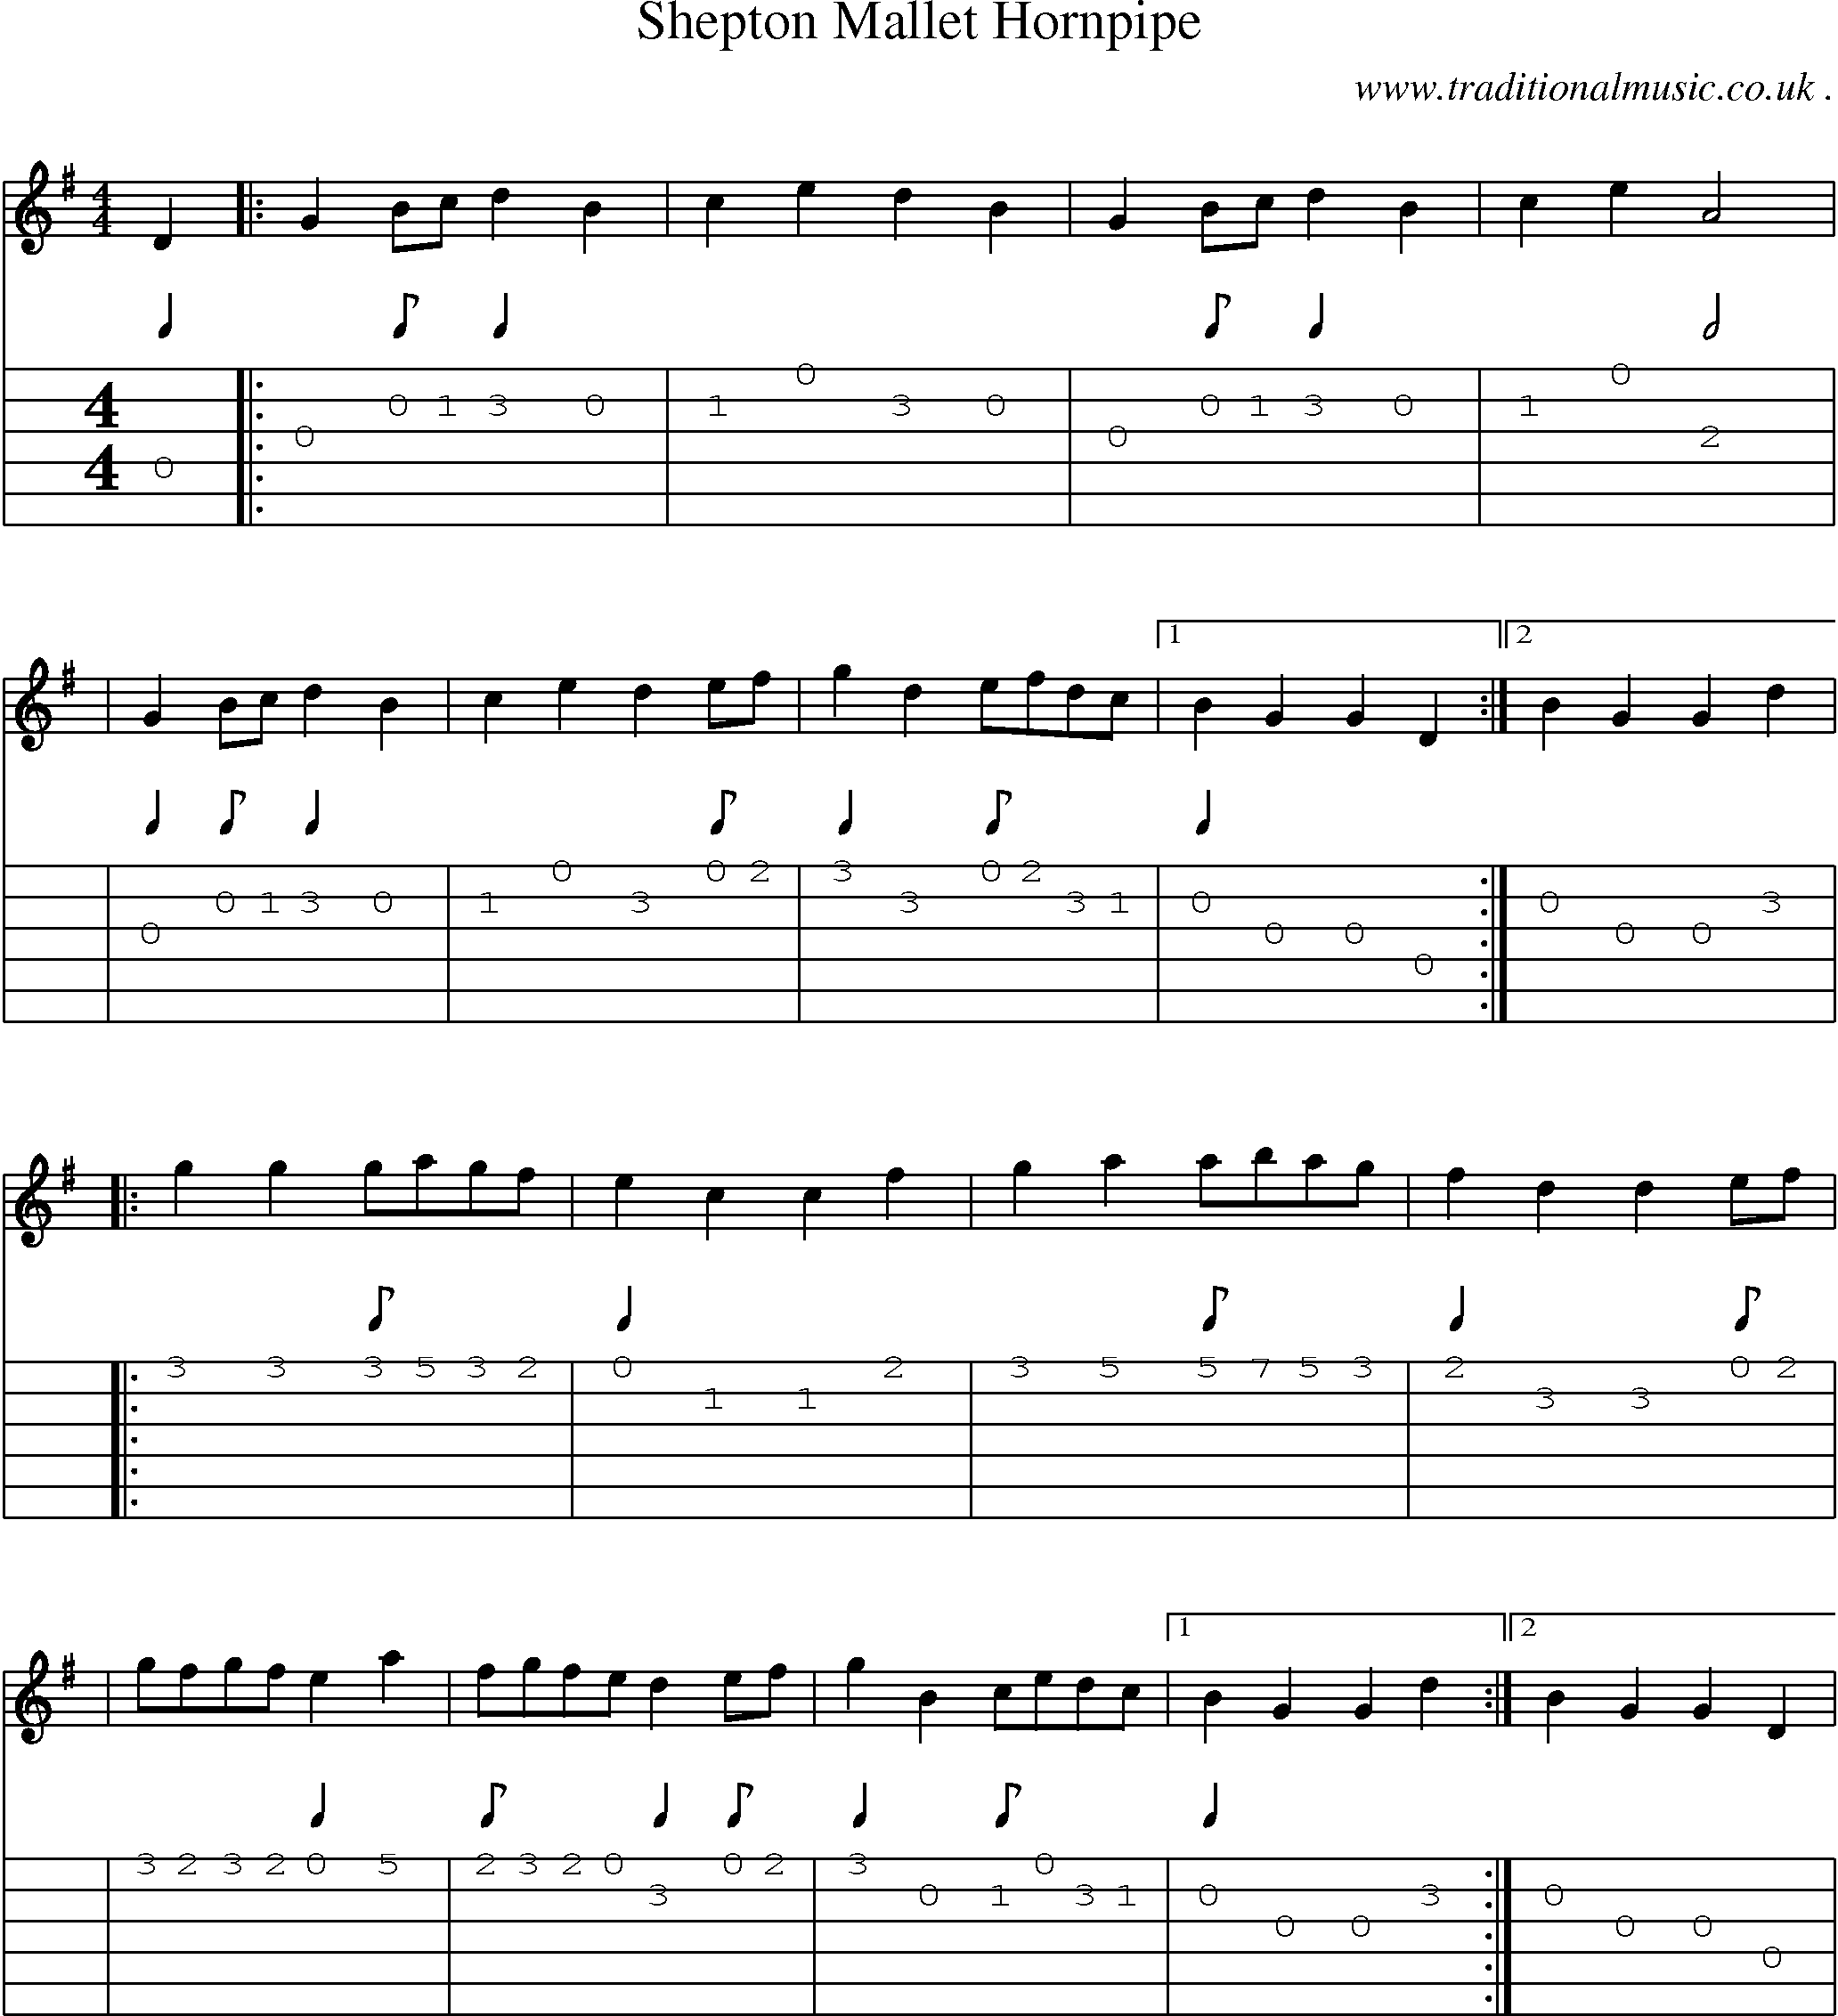 Sheet-Music and Guitar Tabs for Shepton Mallet Hornpipe